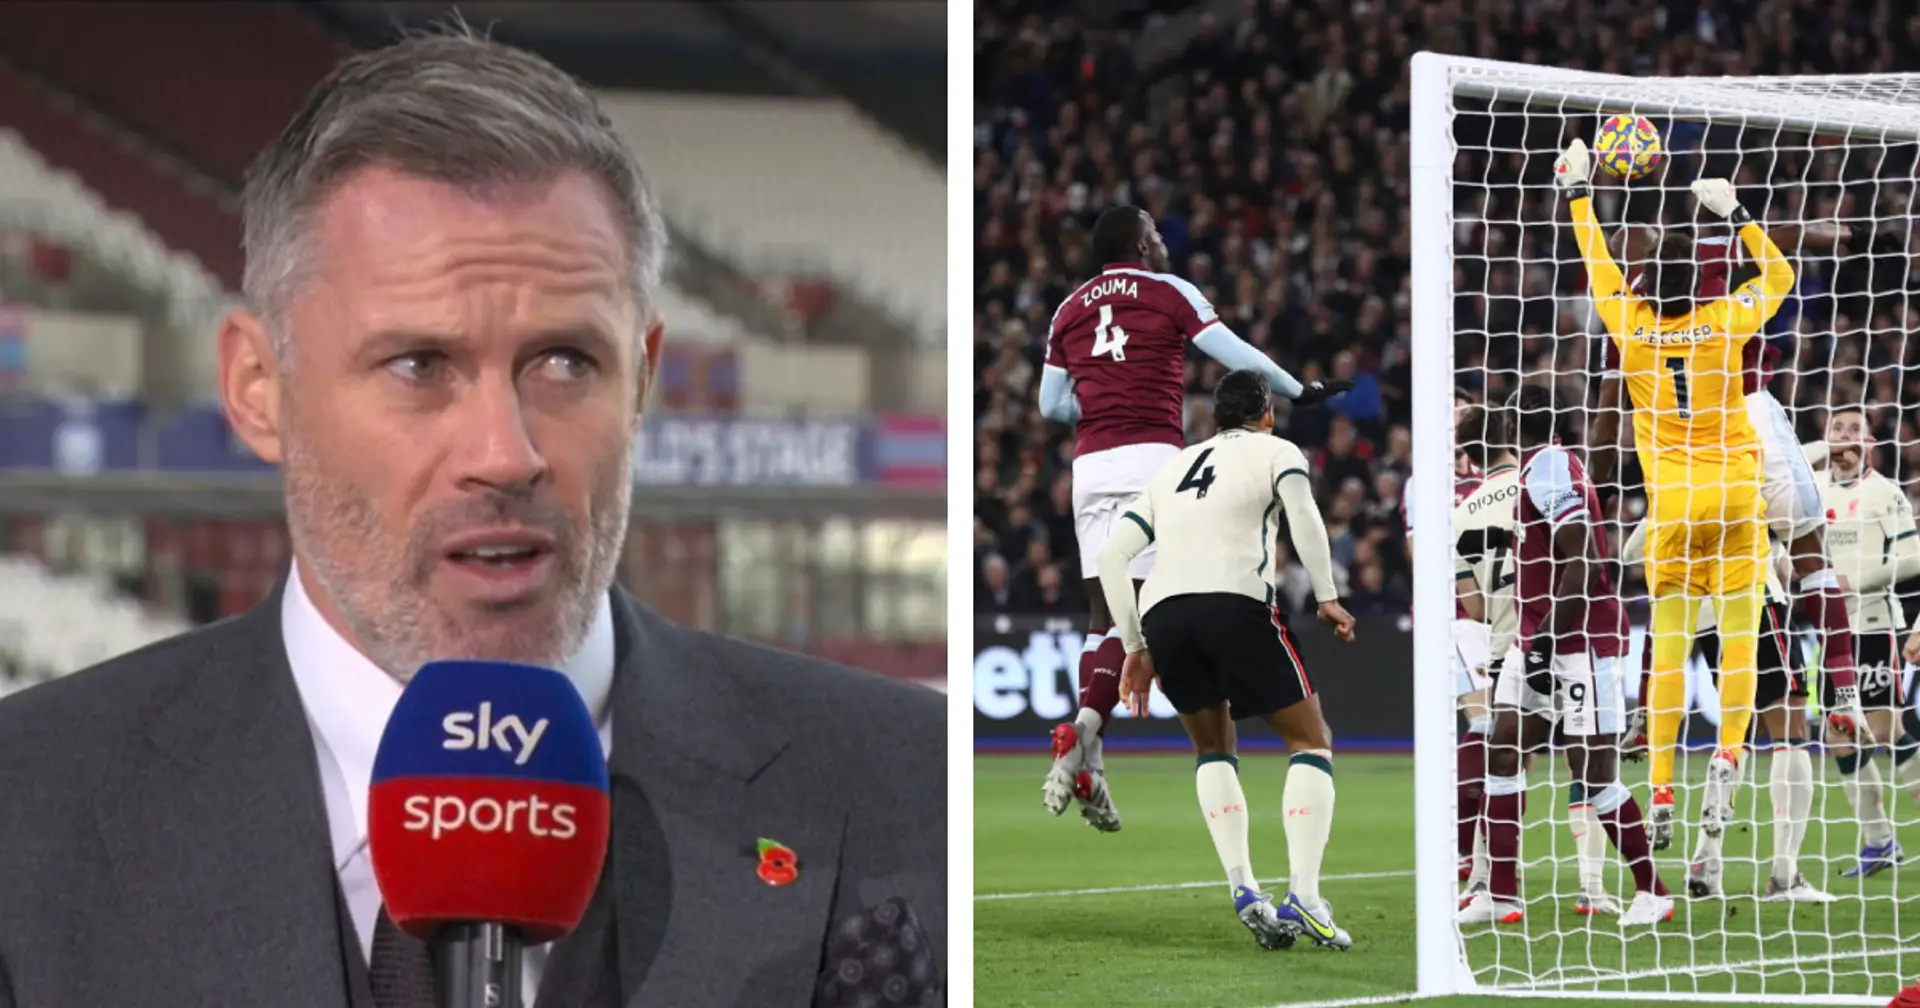 'Should have done better on all 3 goals': Carragher criticises Alisson after West Ham defeat